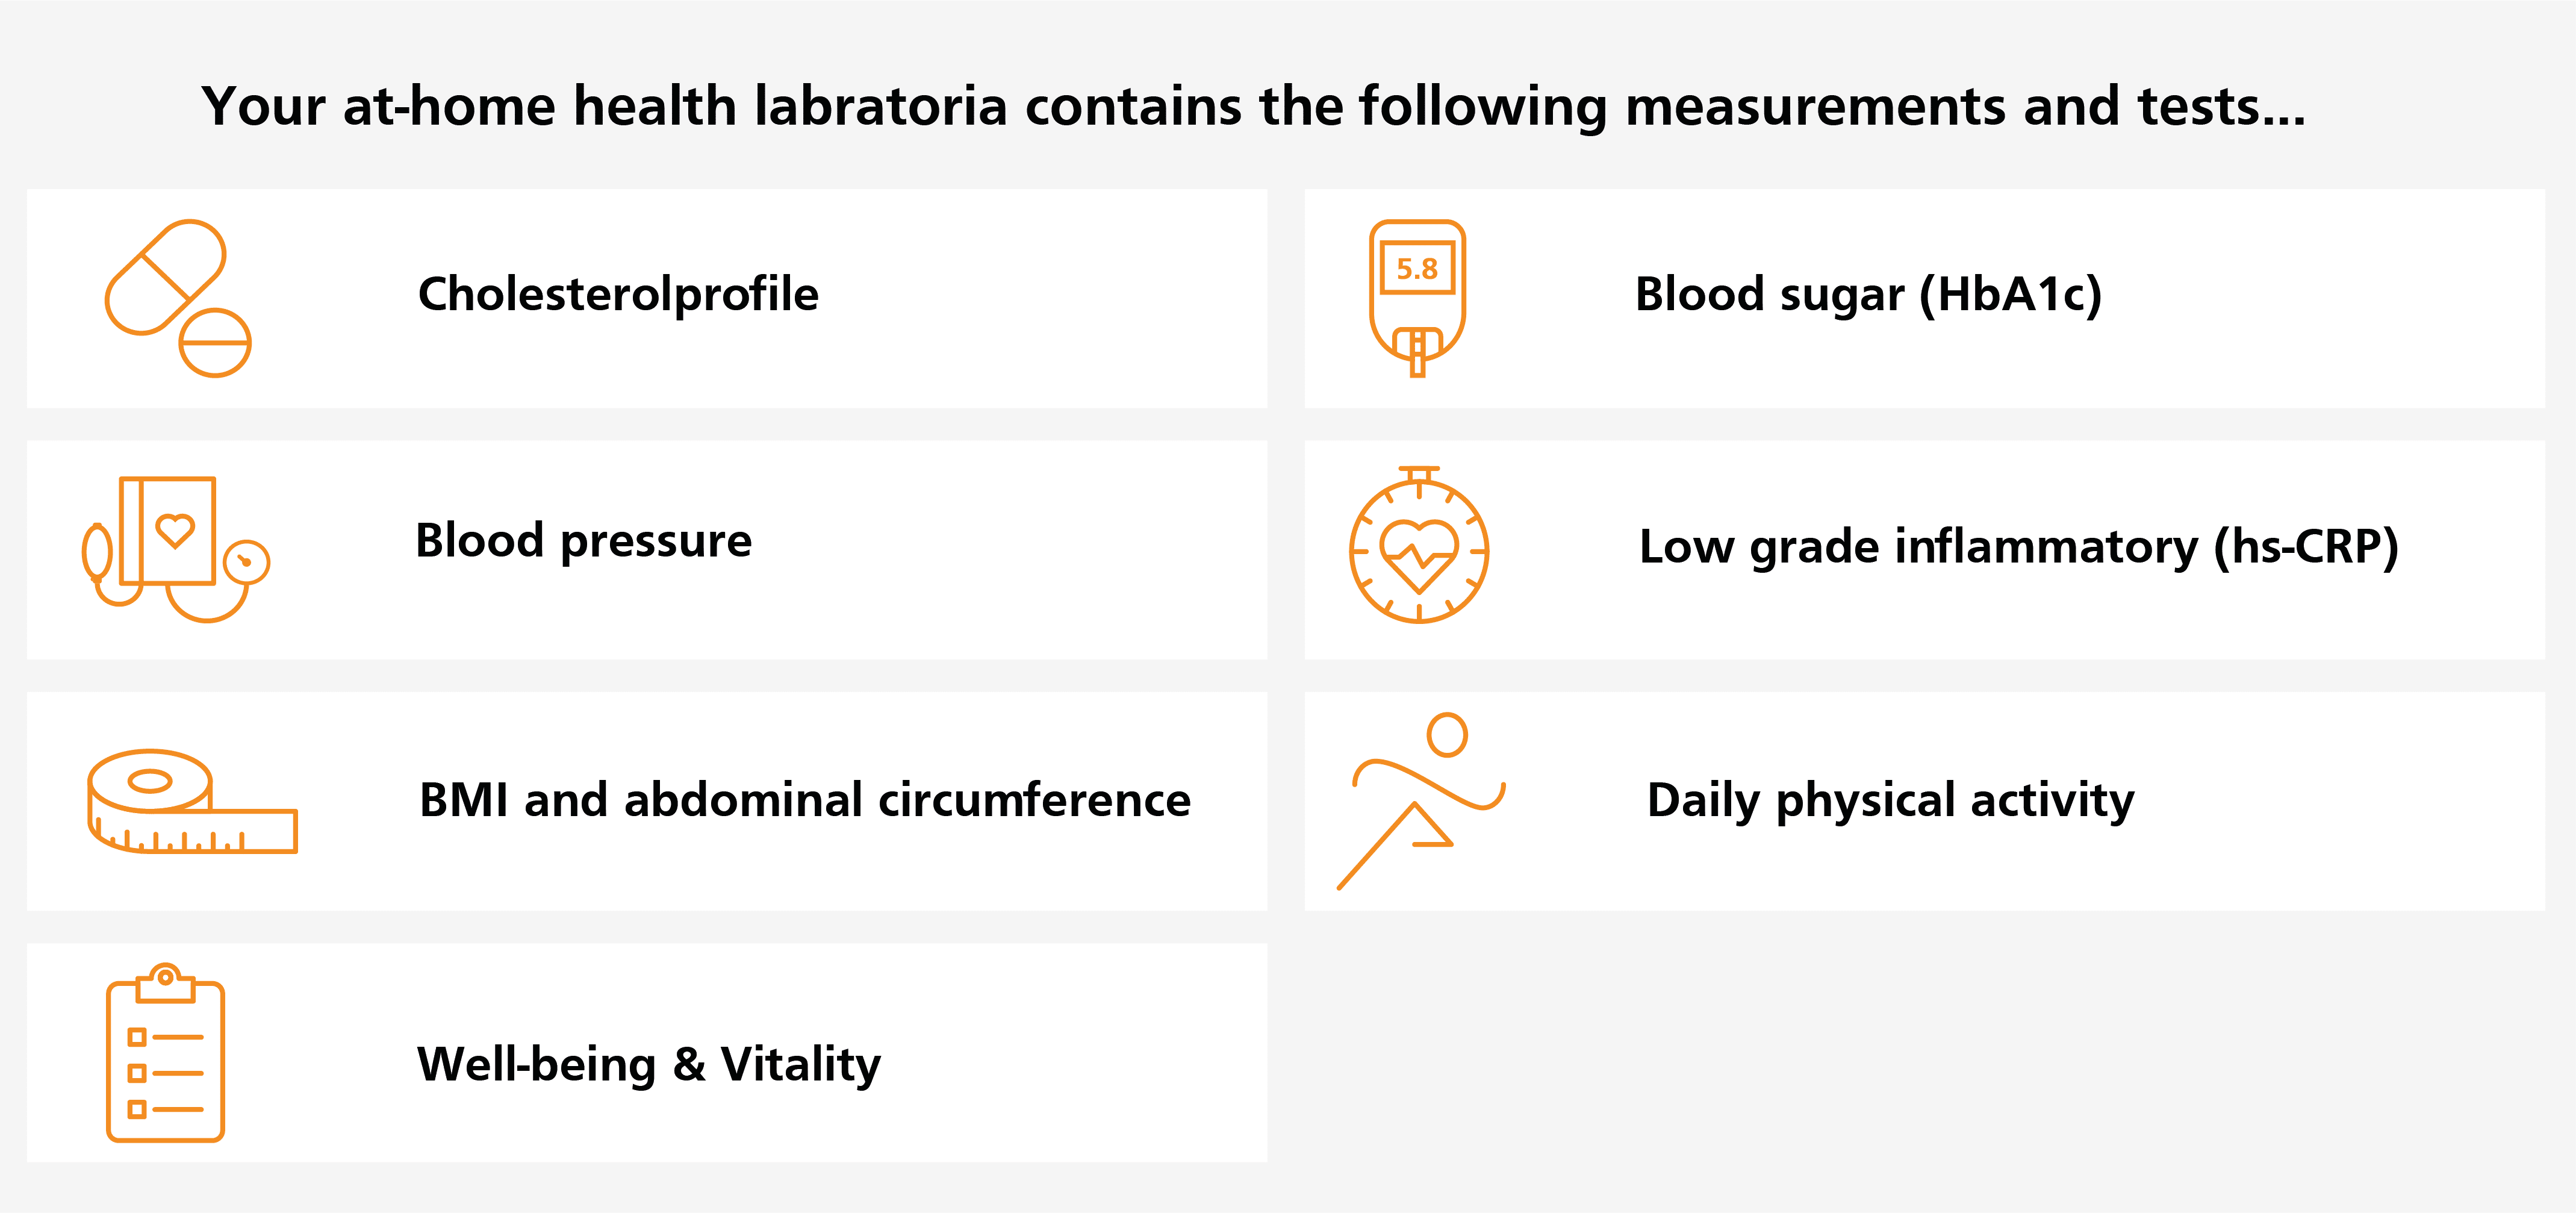 What is being measured?